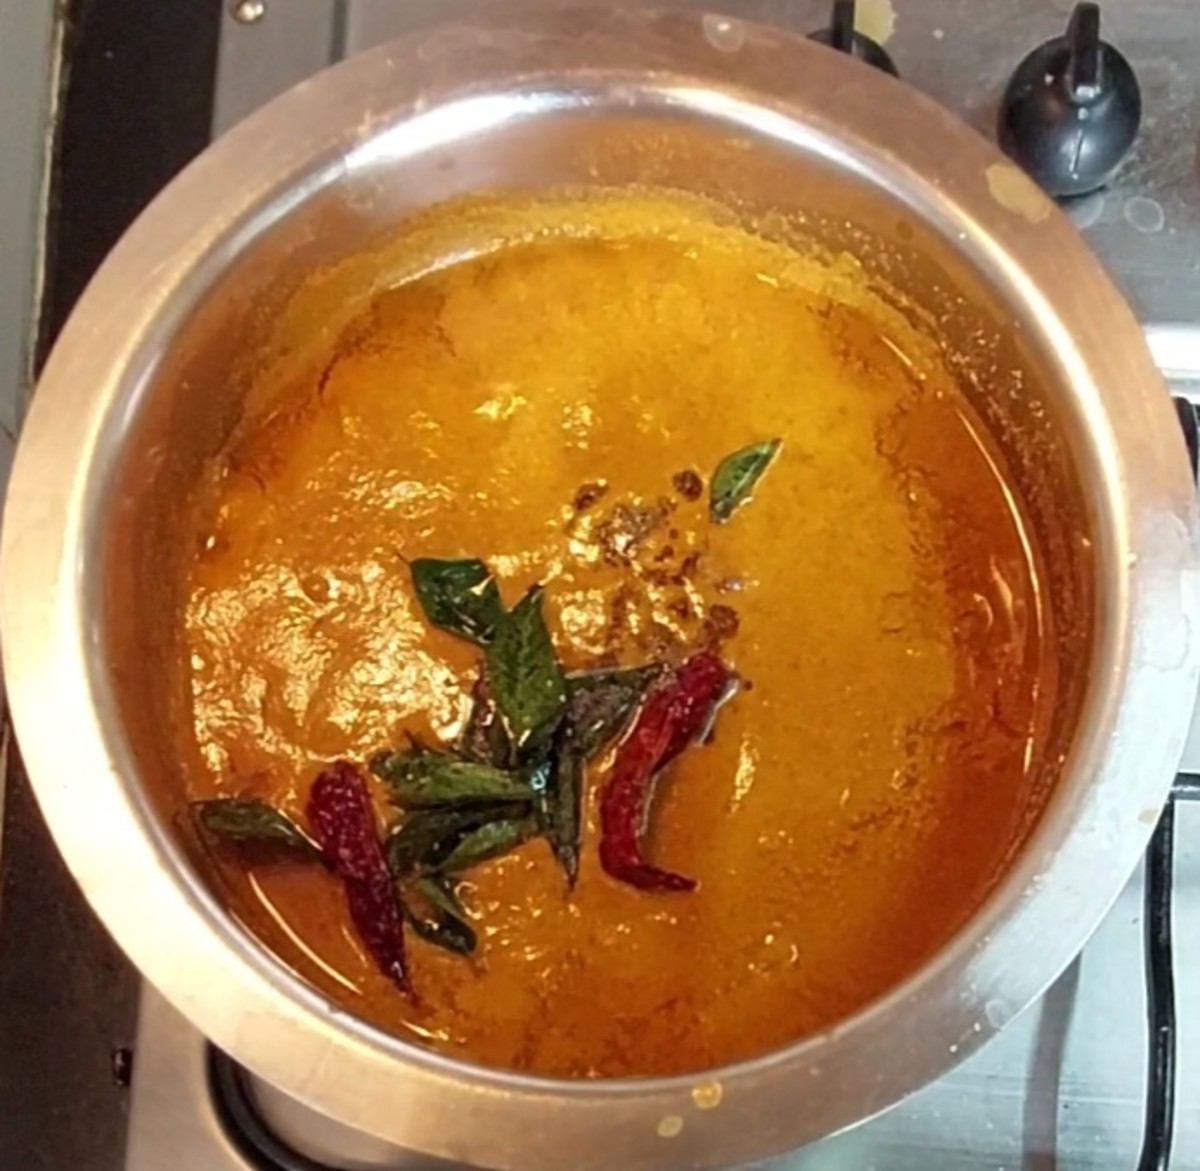 Add this tempering to the prepared sambar. Keep it covered for 2 minutes.